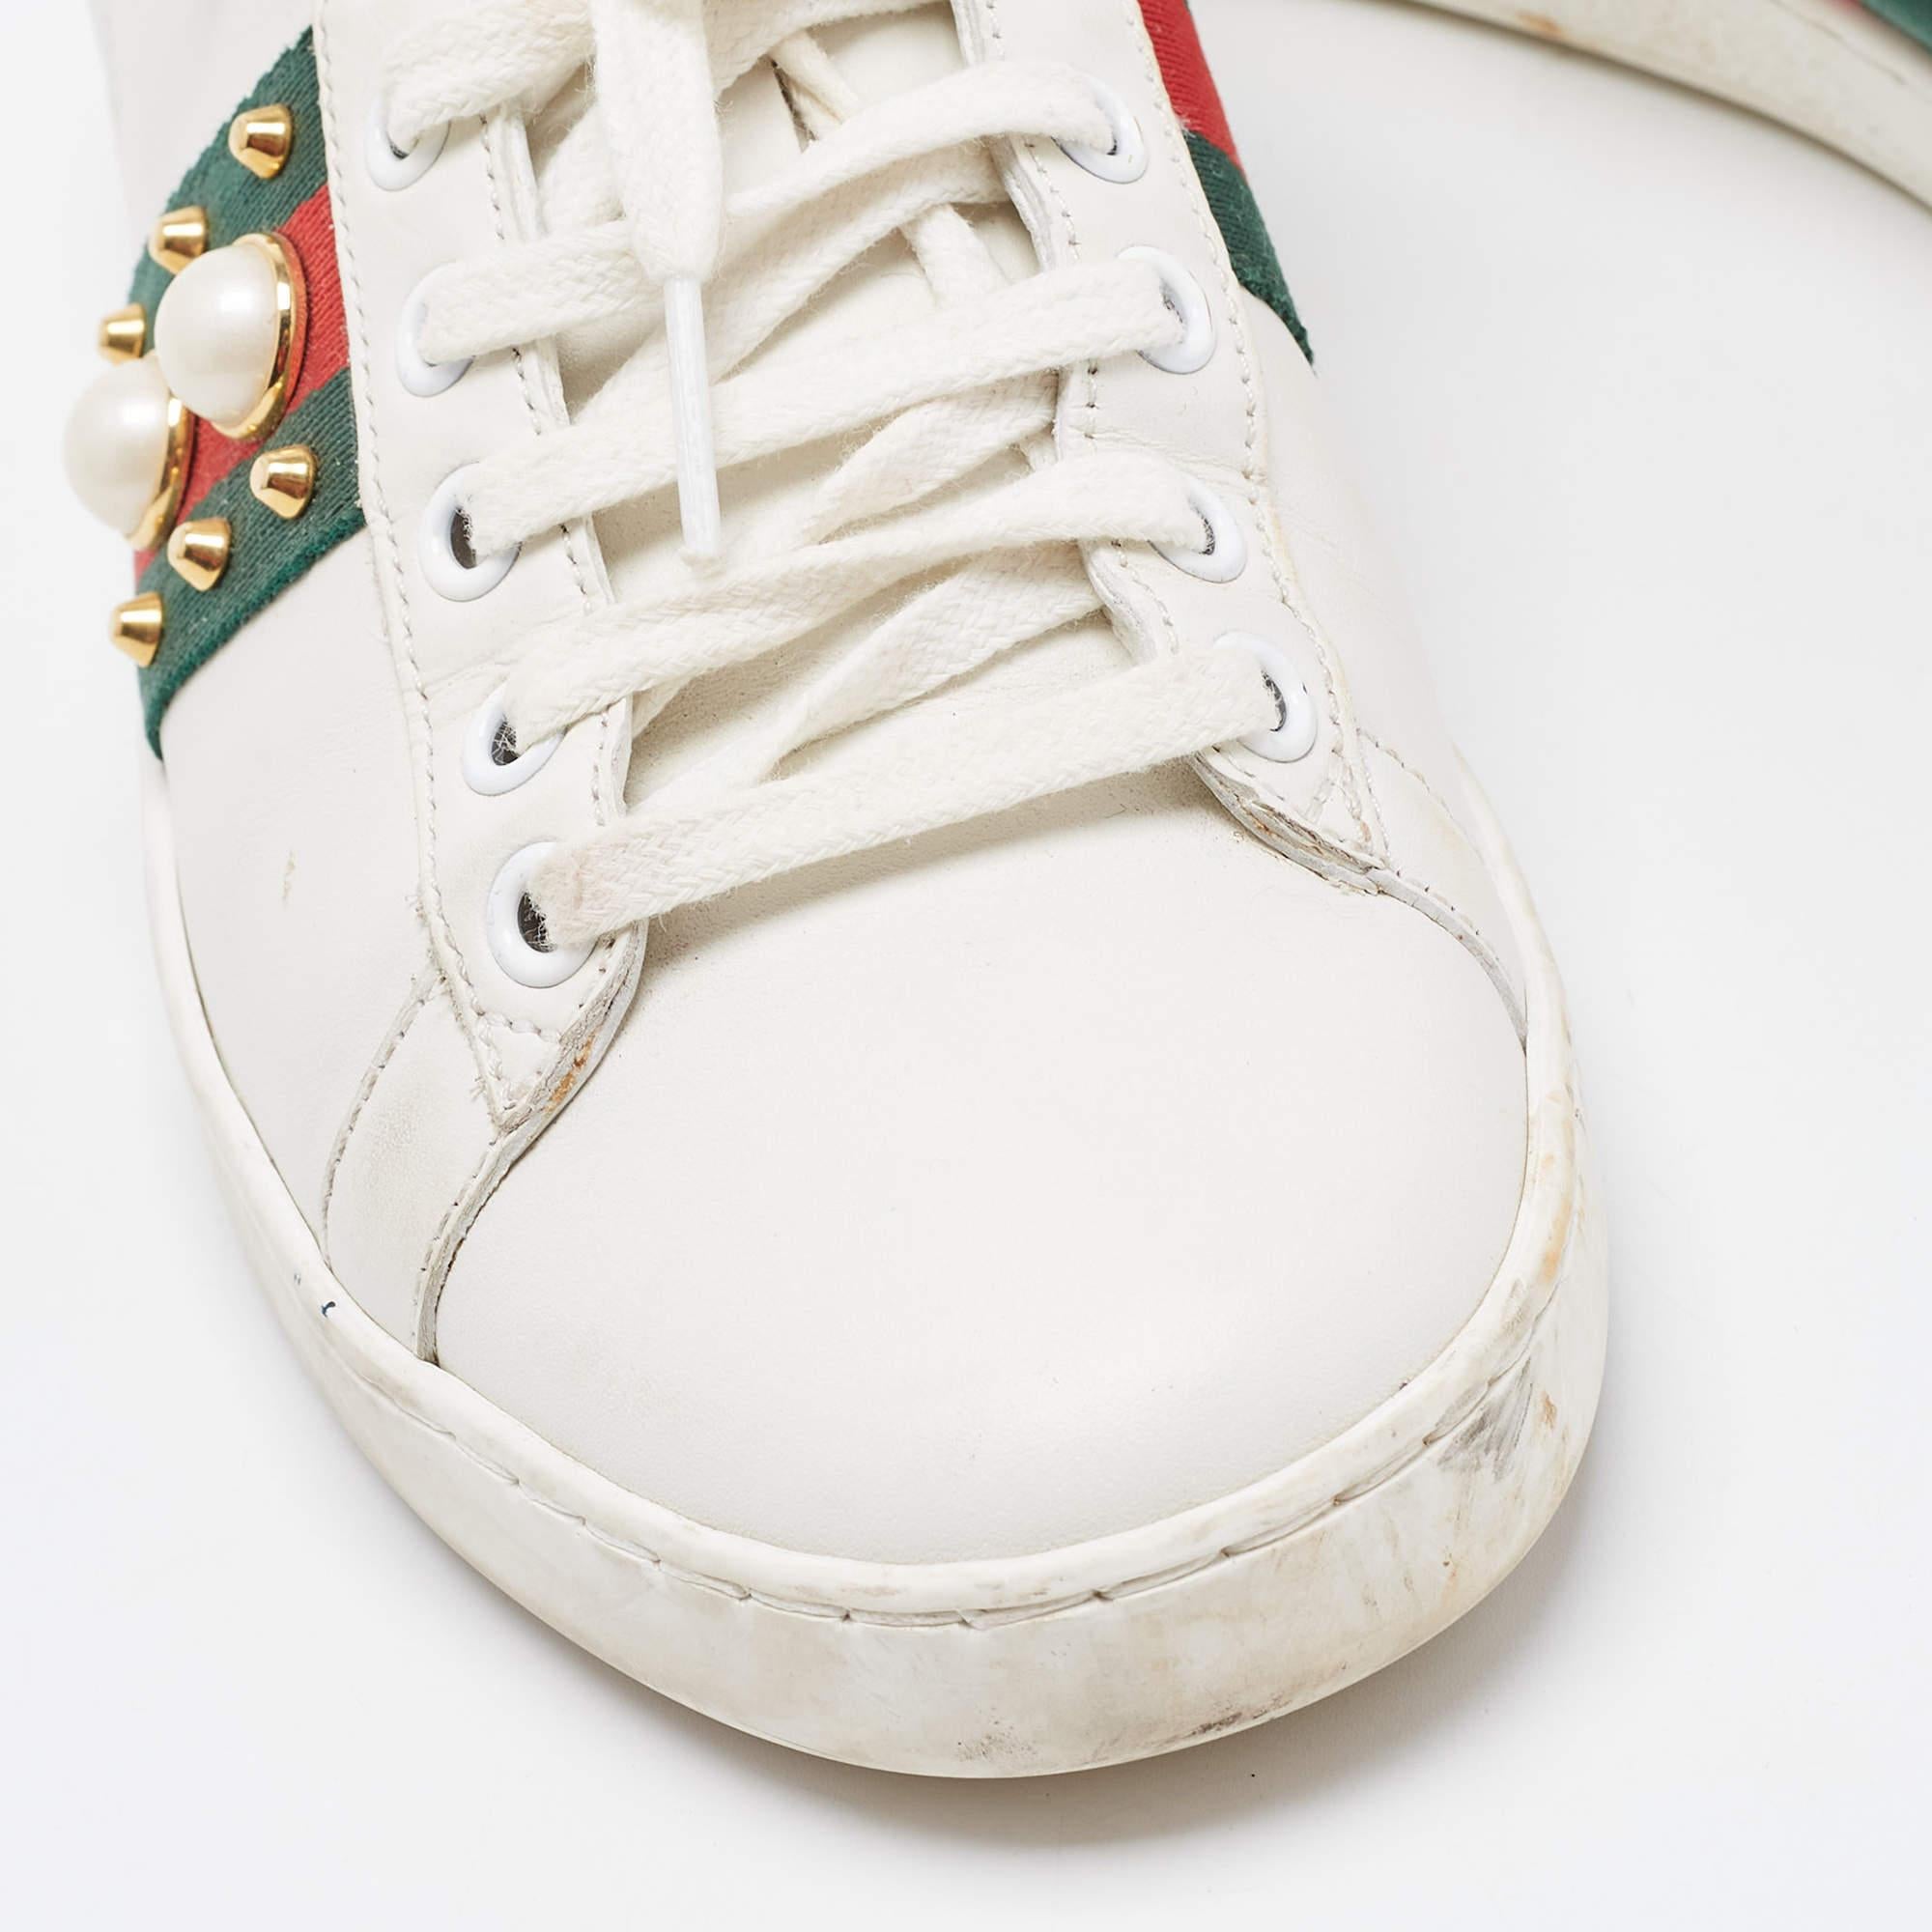 Gucci White Leather Studded and Spiked Ace Sneakers Size 36 For Sale 3